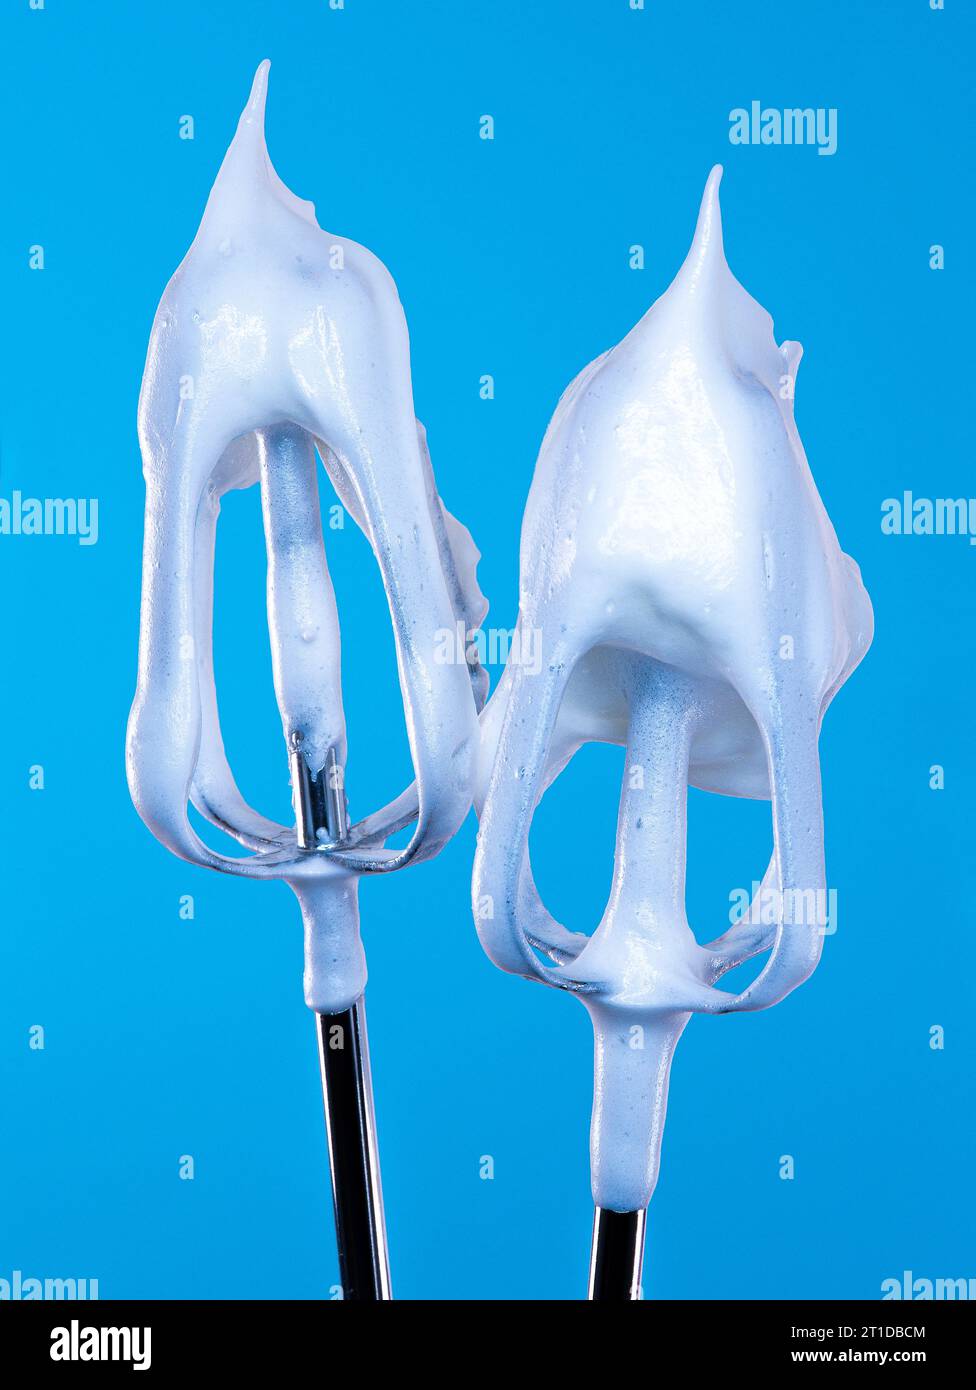 A pair of electric whisk beaters smothered in a luxuriously soft glossy white meringue mixture, pictured against a bold and vibrant backdrop. Stock Photo